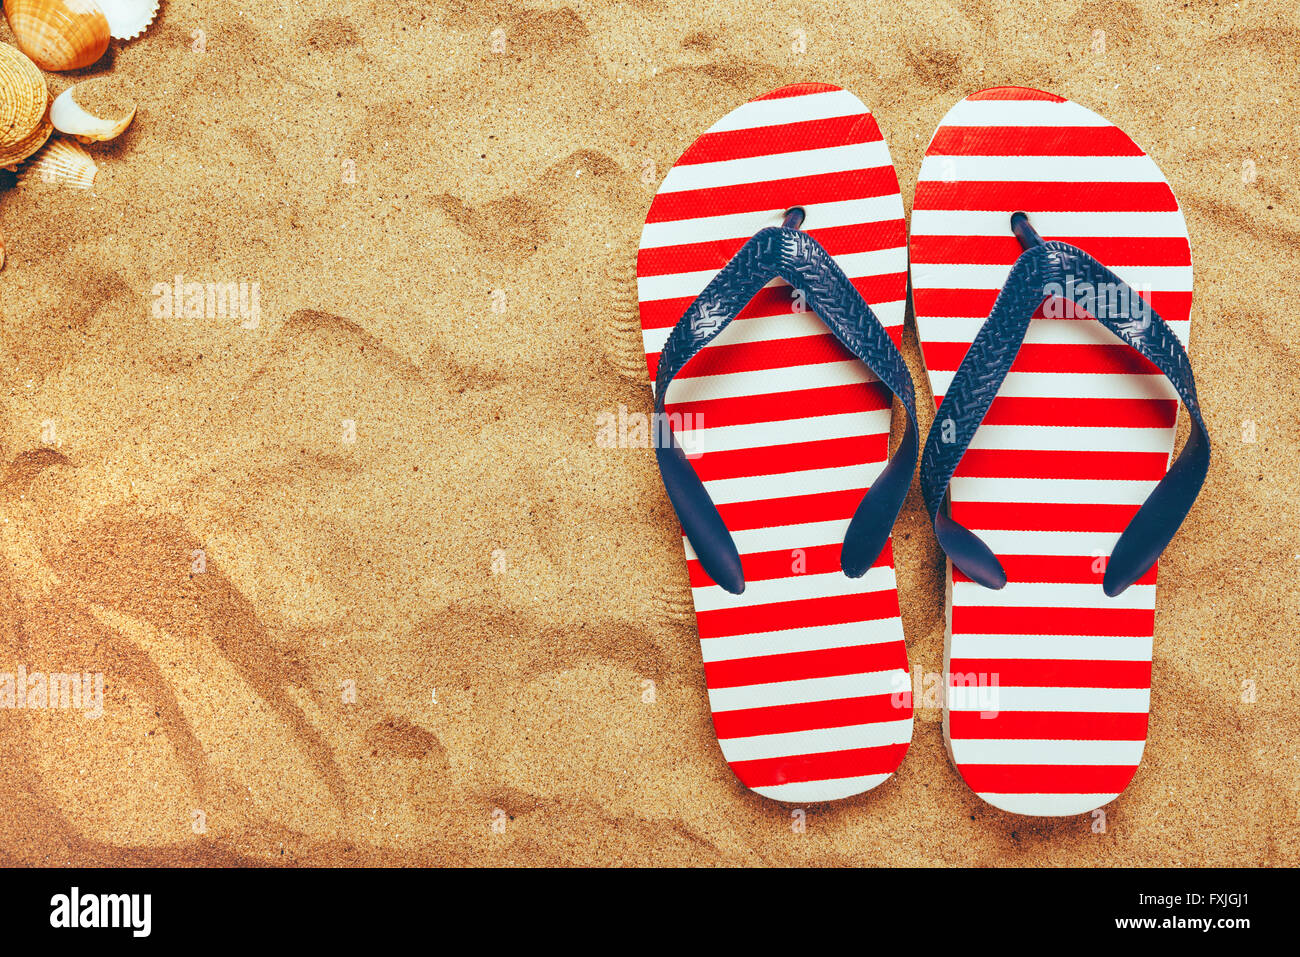 Pair of thongs or flip flops on beach sand, top view of summer holiday ...